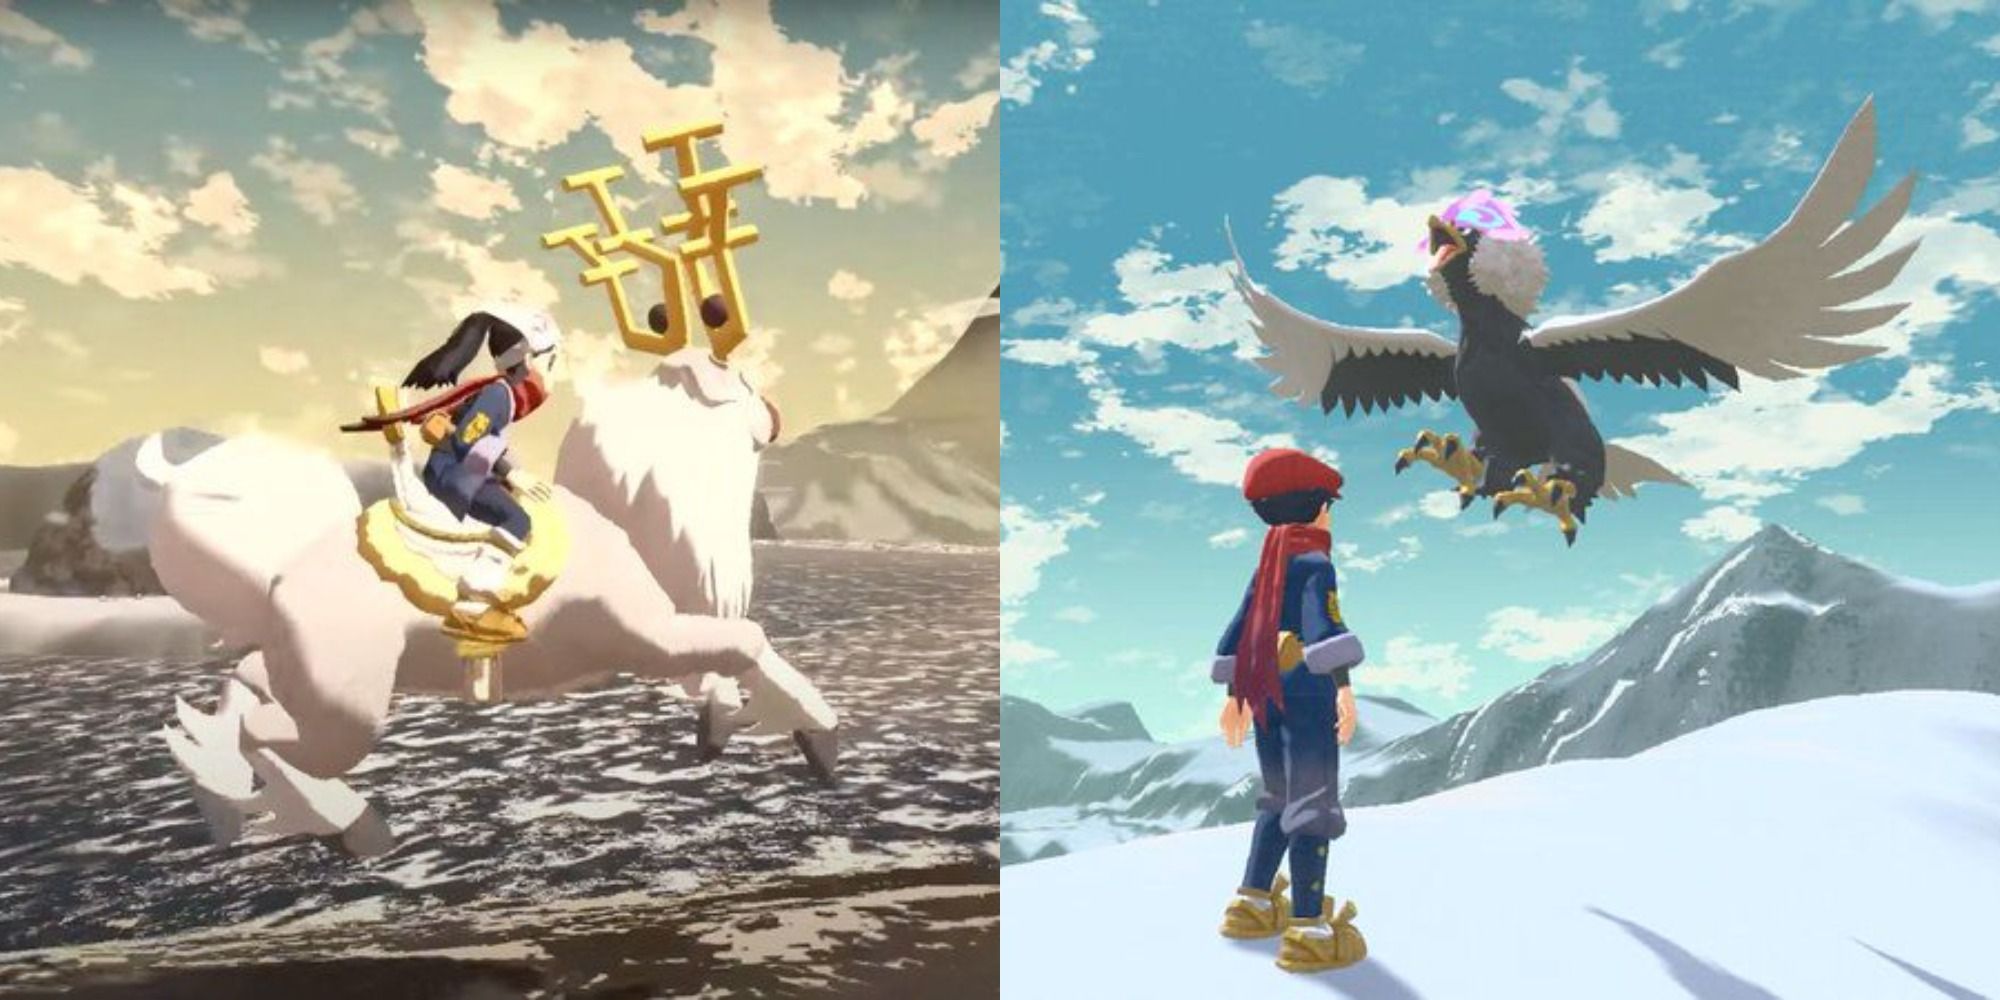 Things we learned from the new Pokémon Legends: Arceus trailer - Gaming